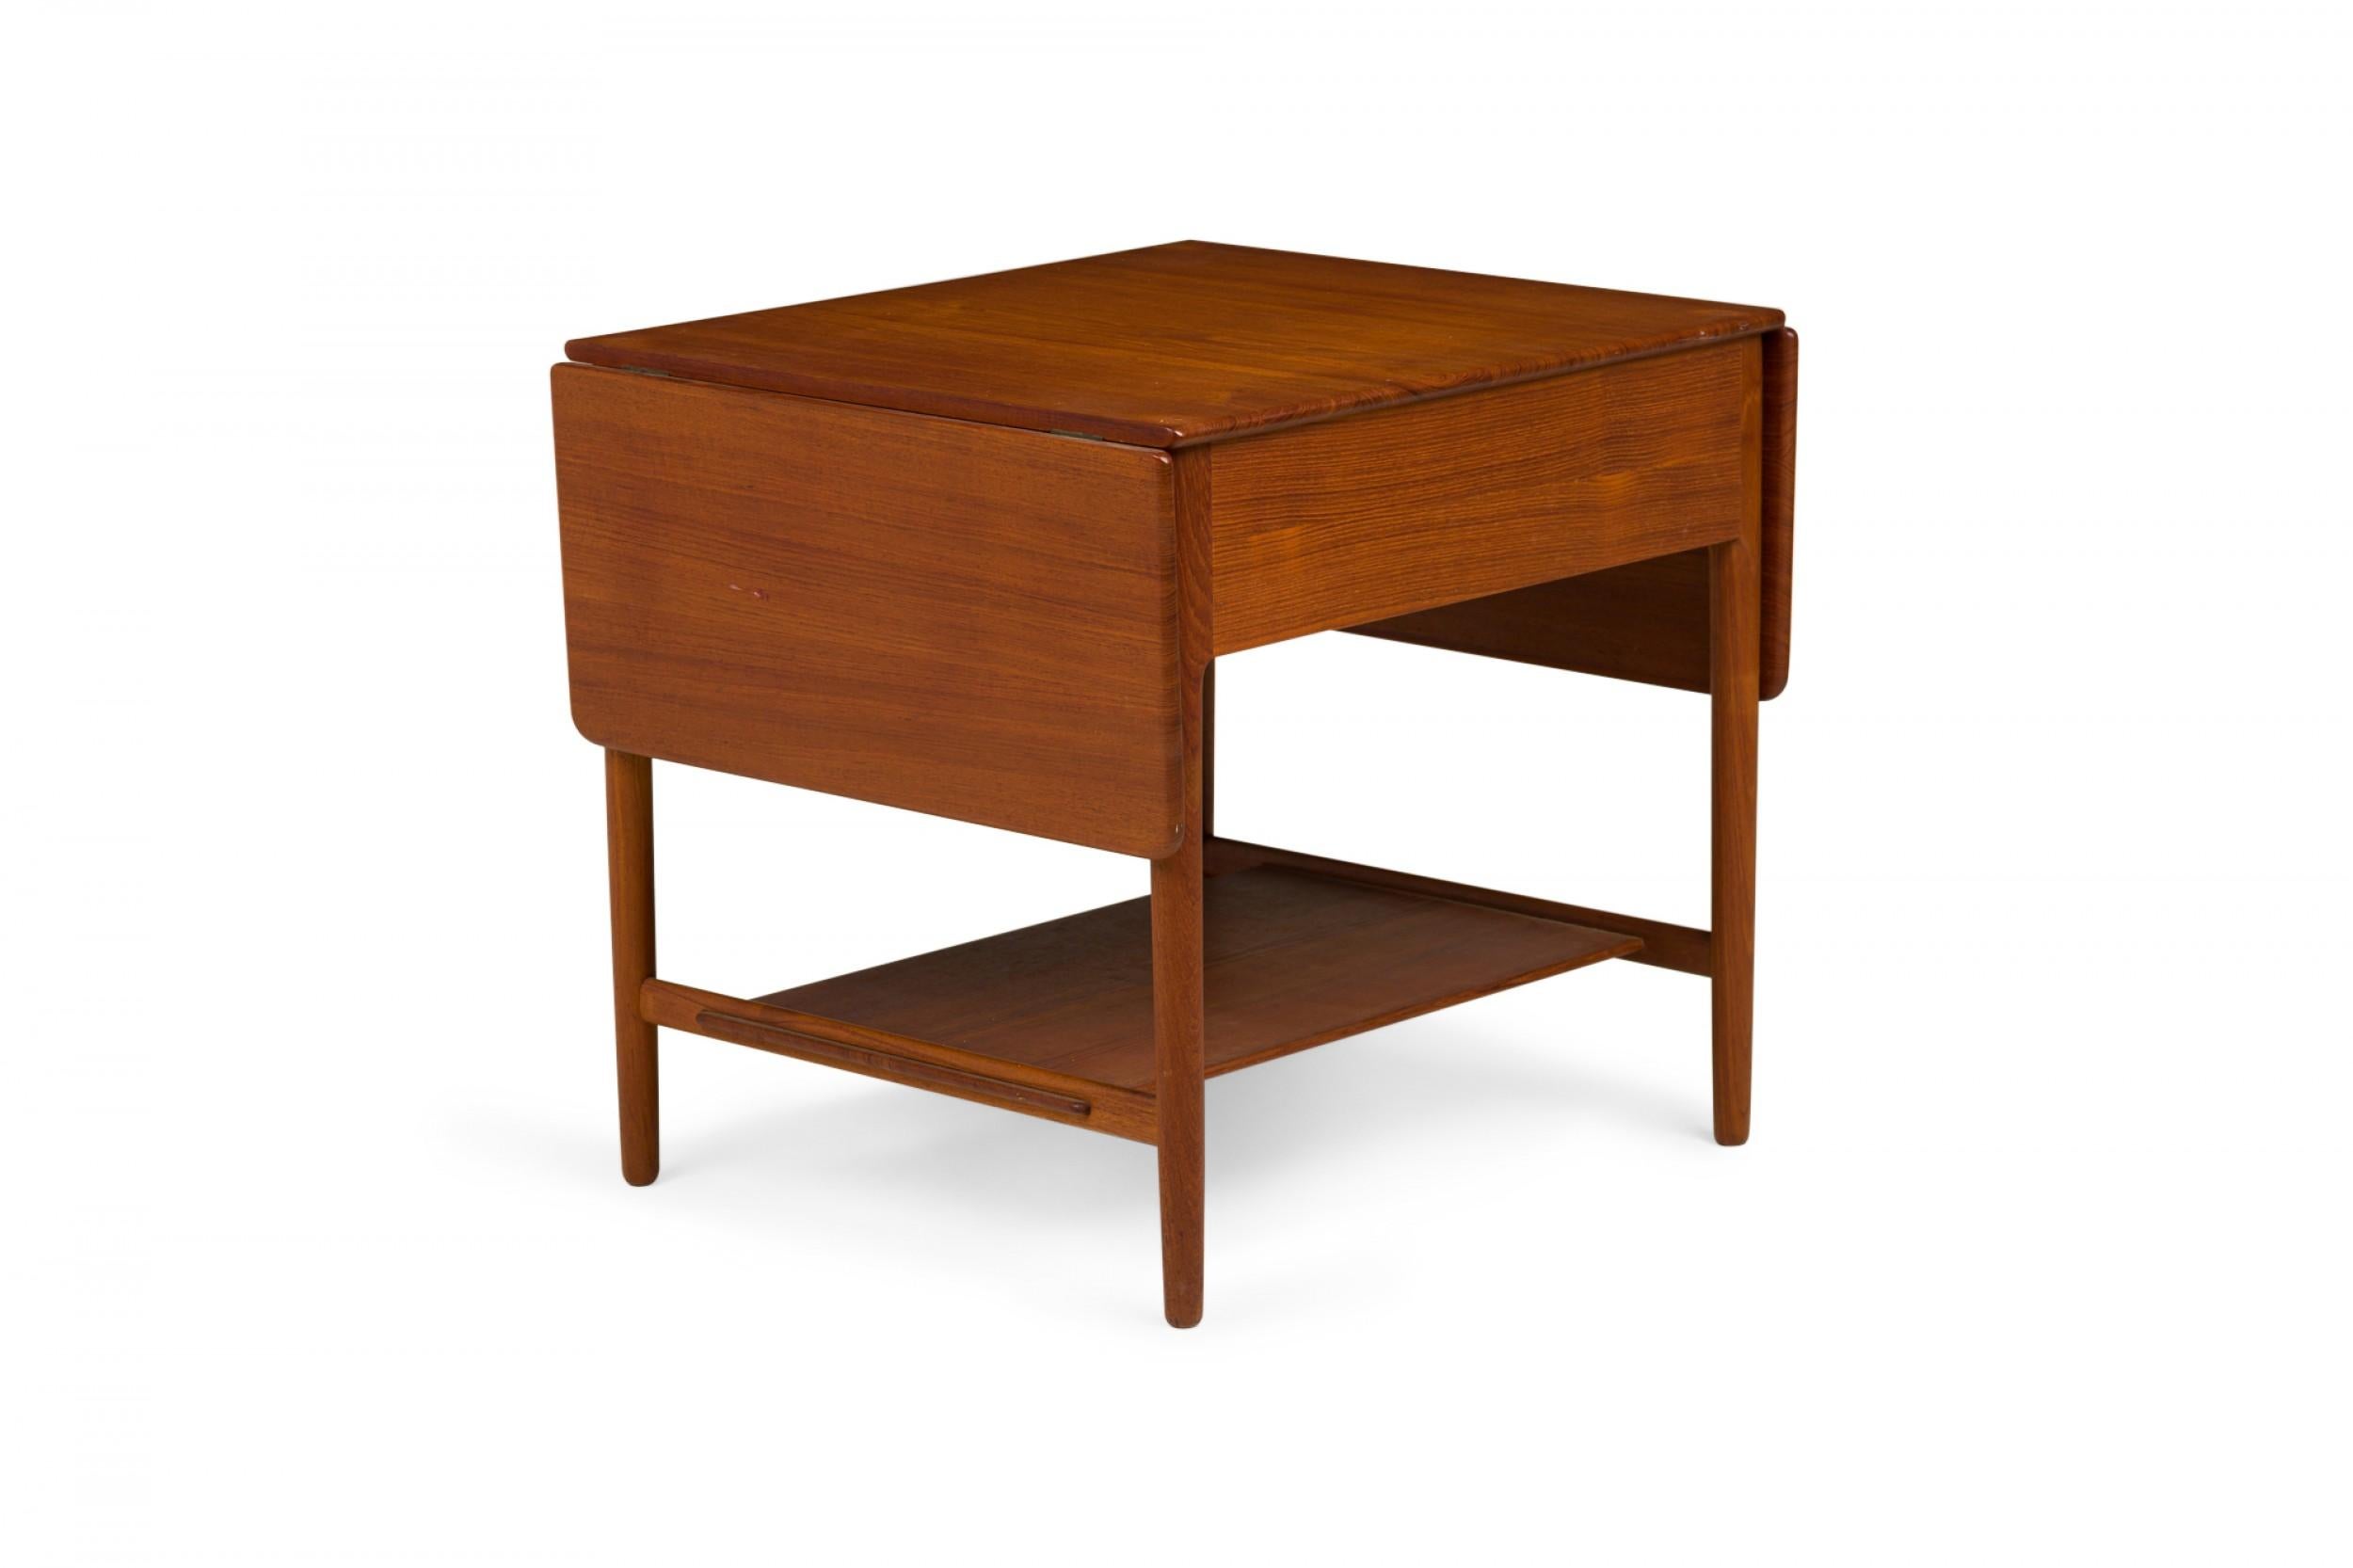 American Hans Wegner for Andreas Tuck Mid-Century Teak Wood Drop Leaf Sewing Table For Sale